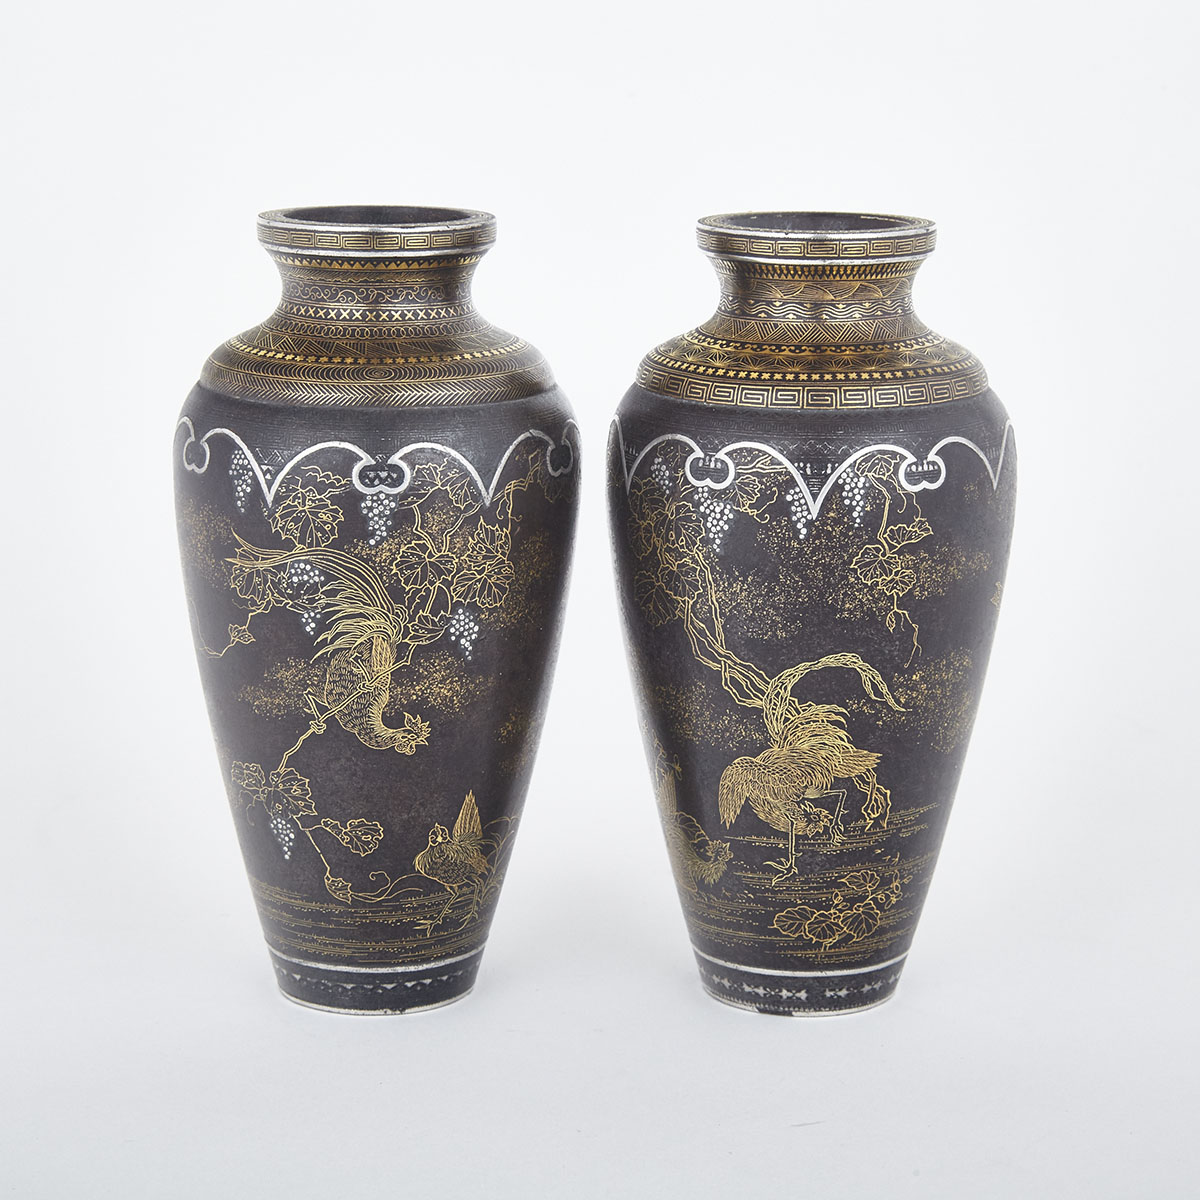 Pair of Japanese Komai of Kyoto Damascene Ware Gold and Silver Inlaid Iron Vases, Meiji Period, late 19th century